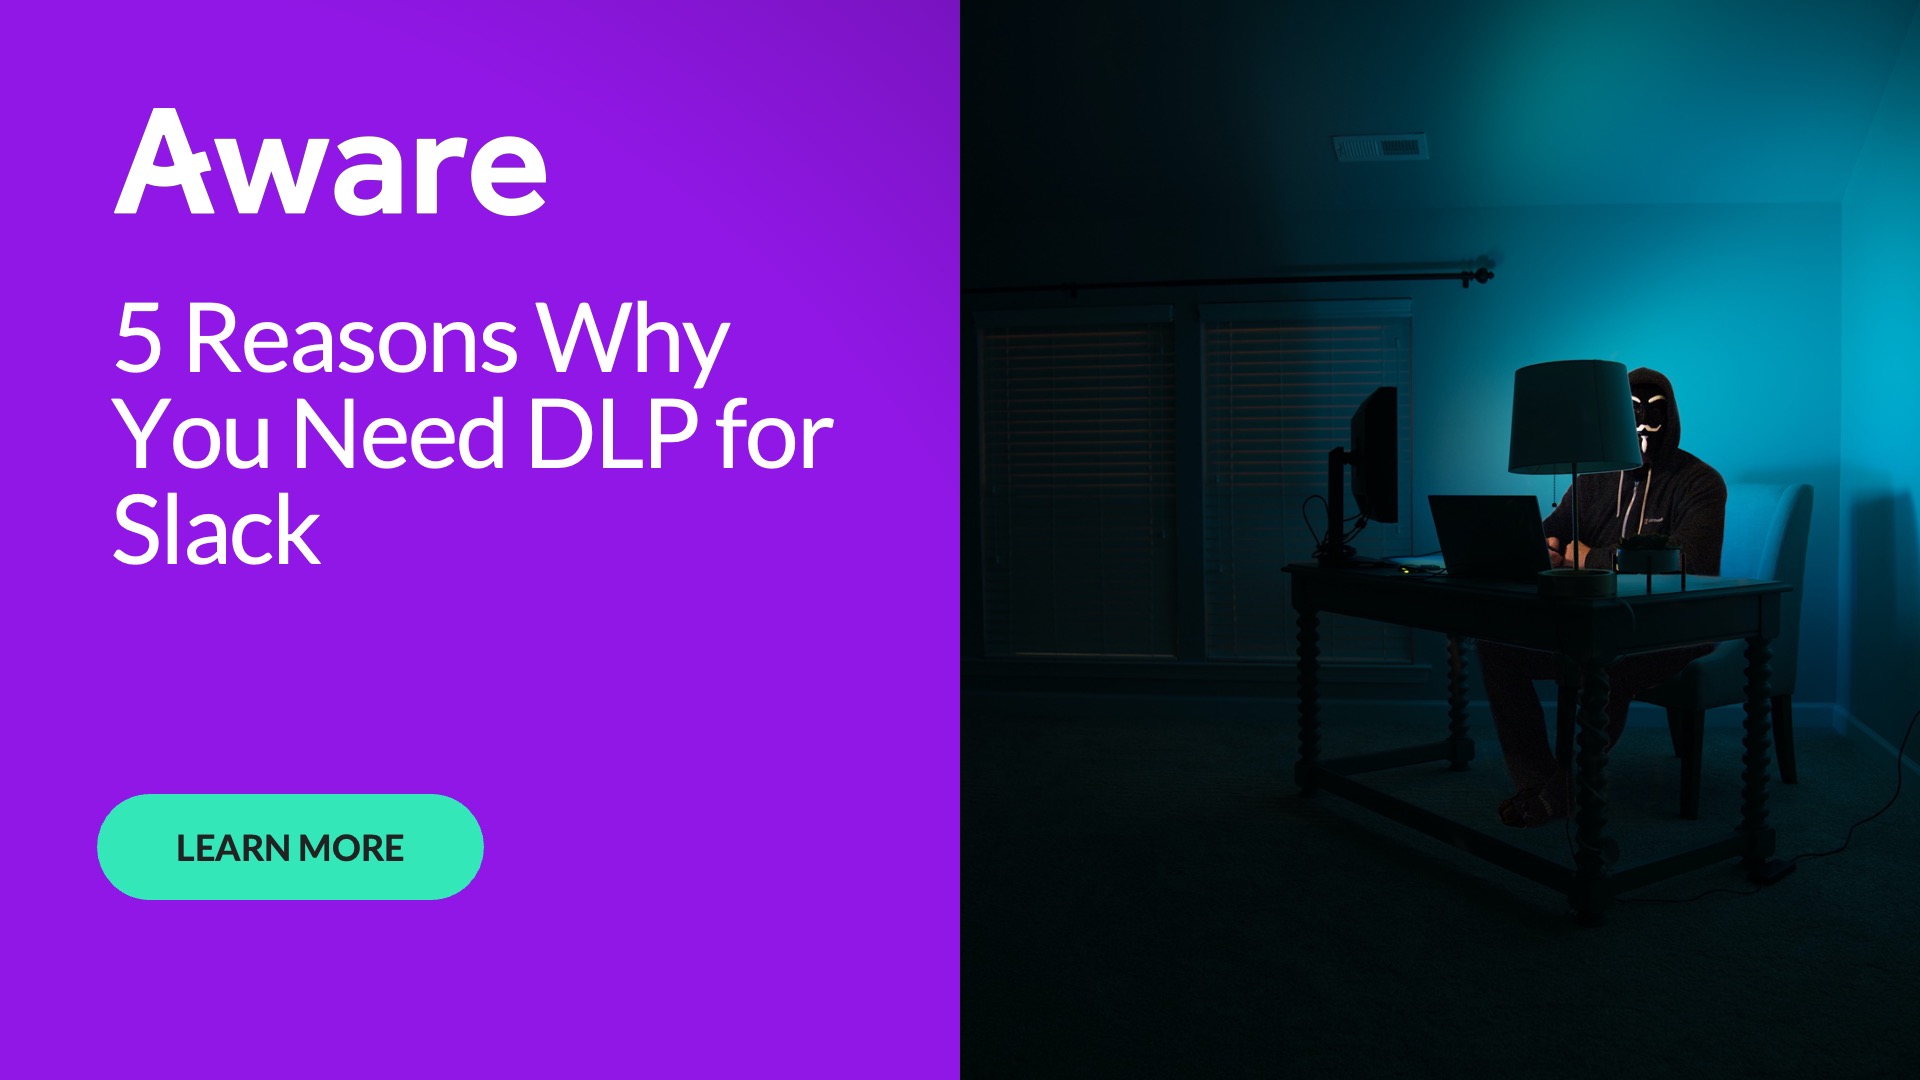 5 Reasons Why You Need DLP for Slack